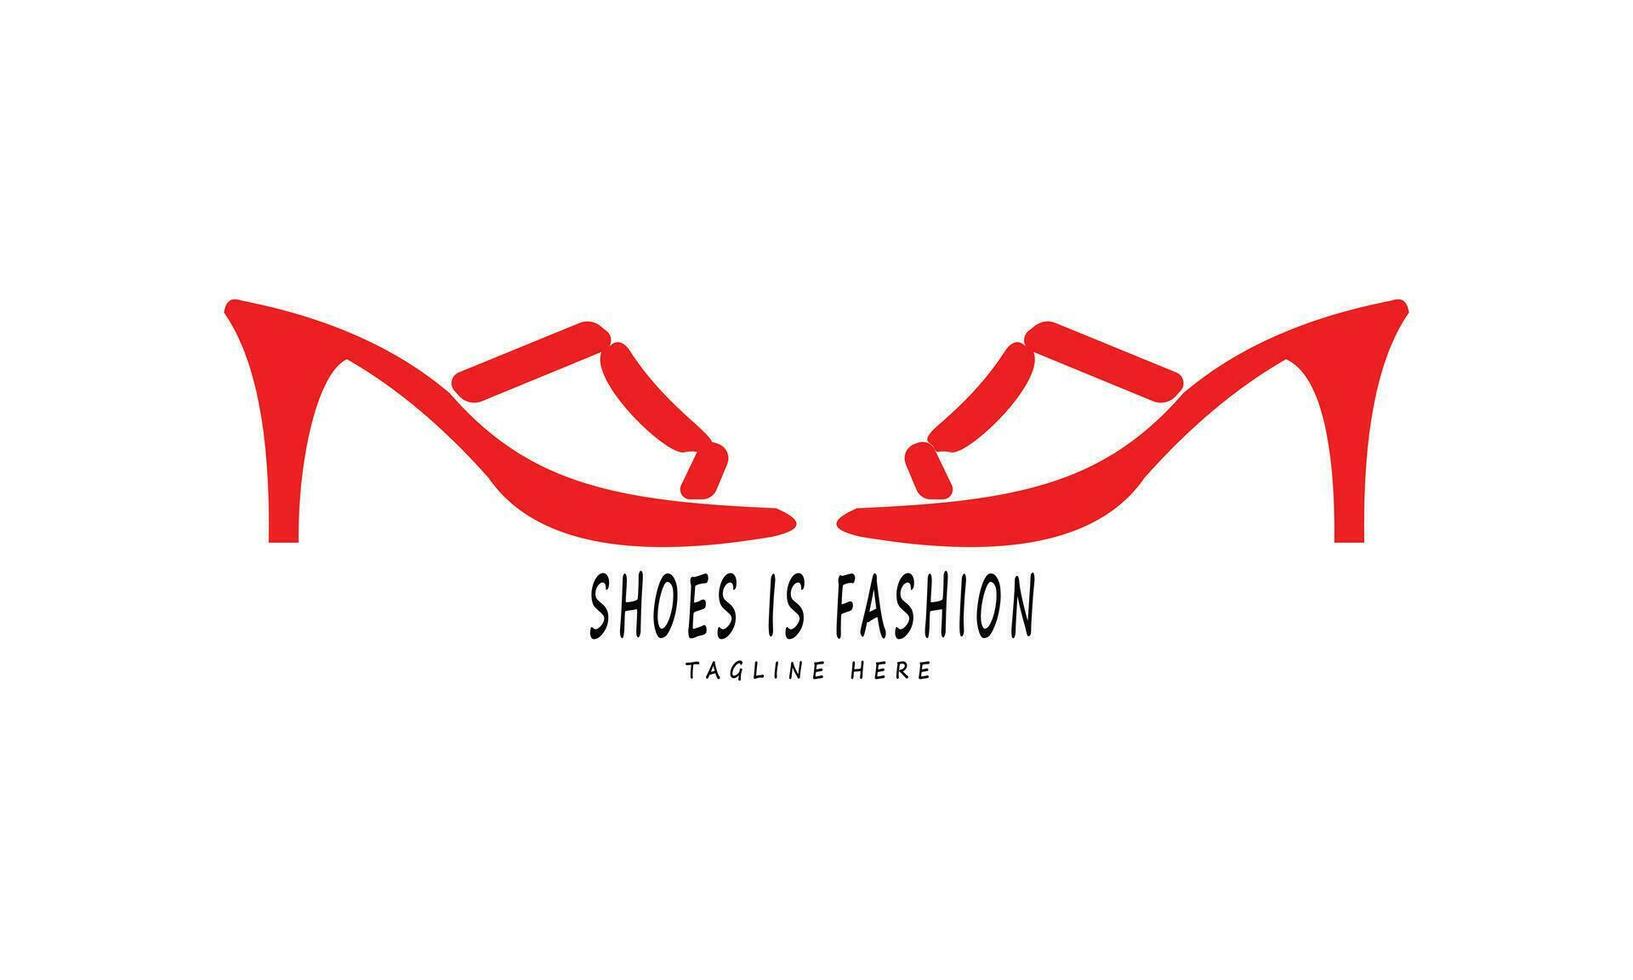 Red high heeled women's shoes are a symbol of trending fashion vector